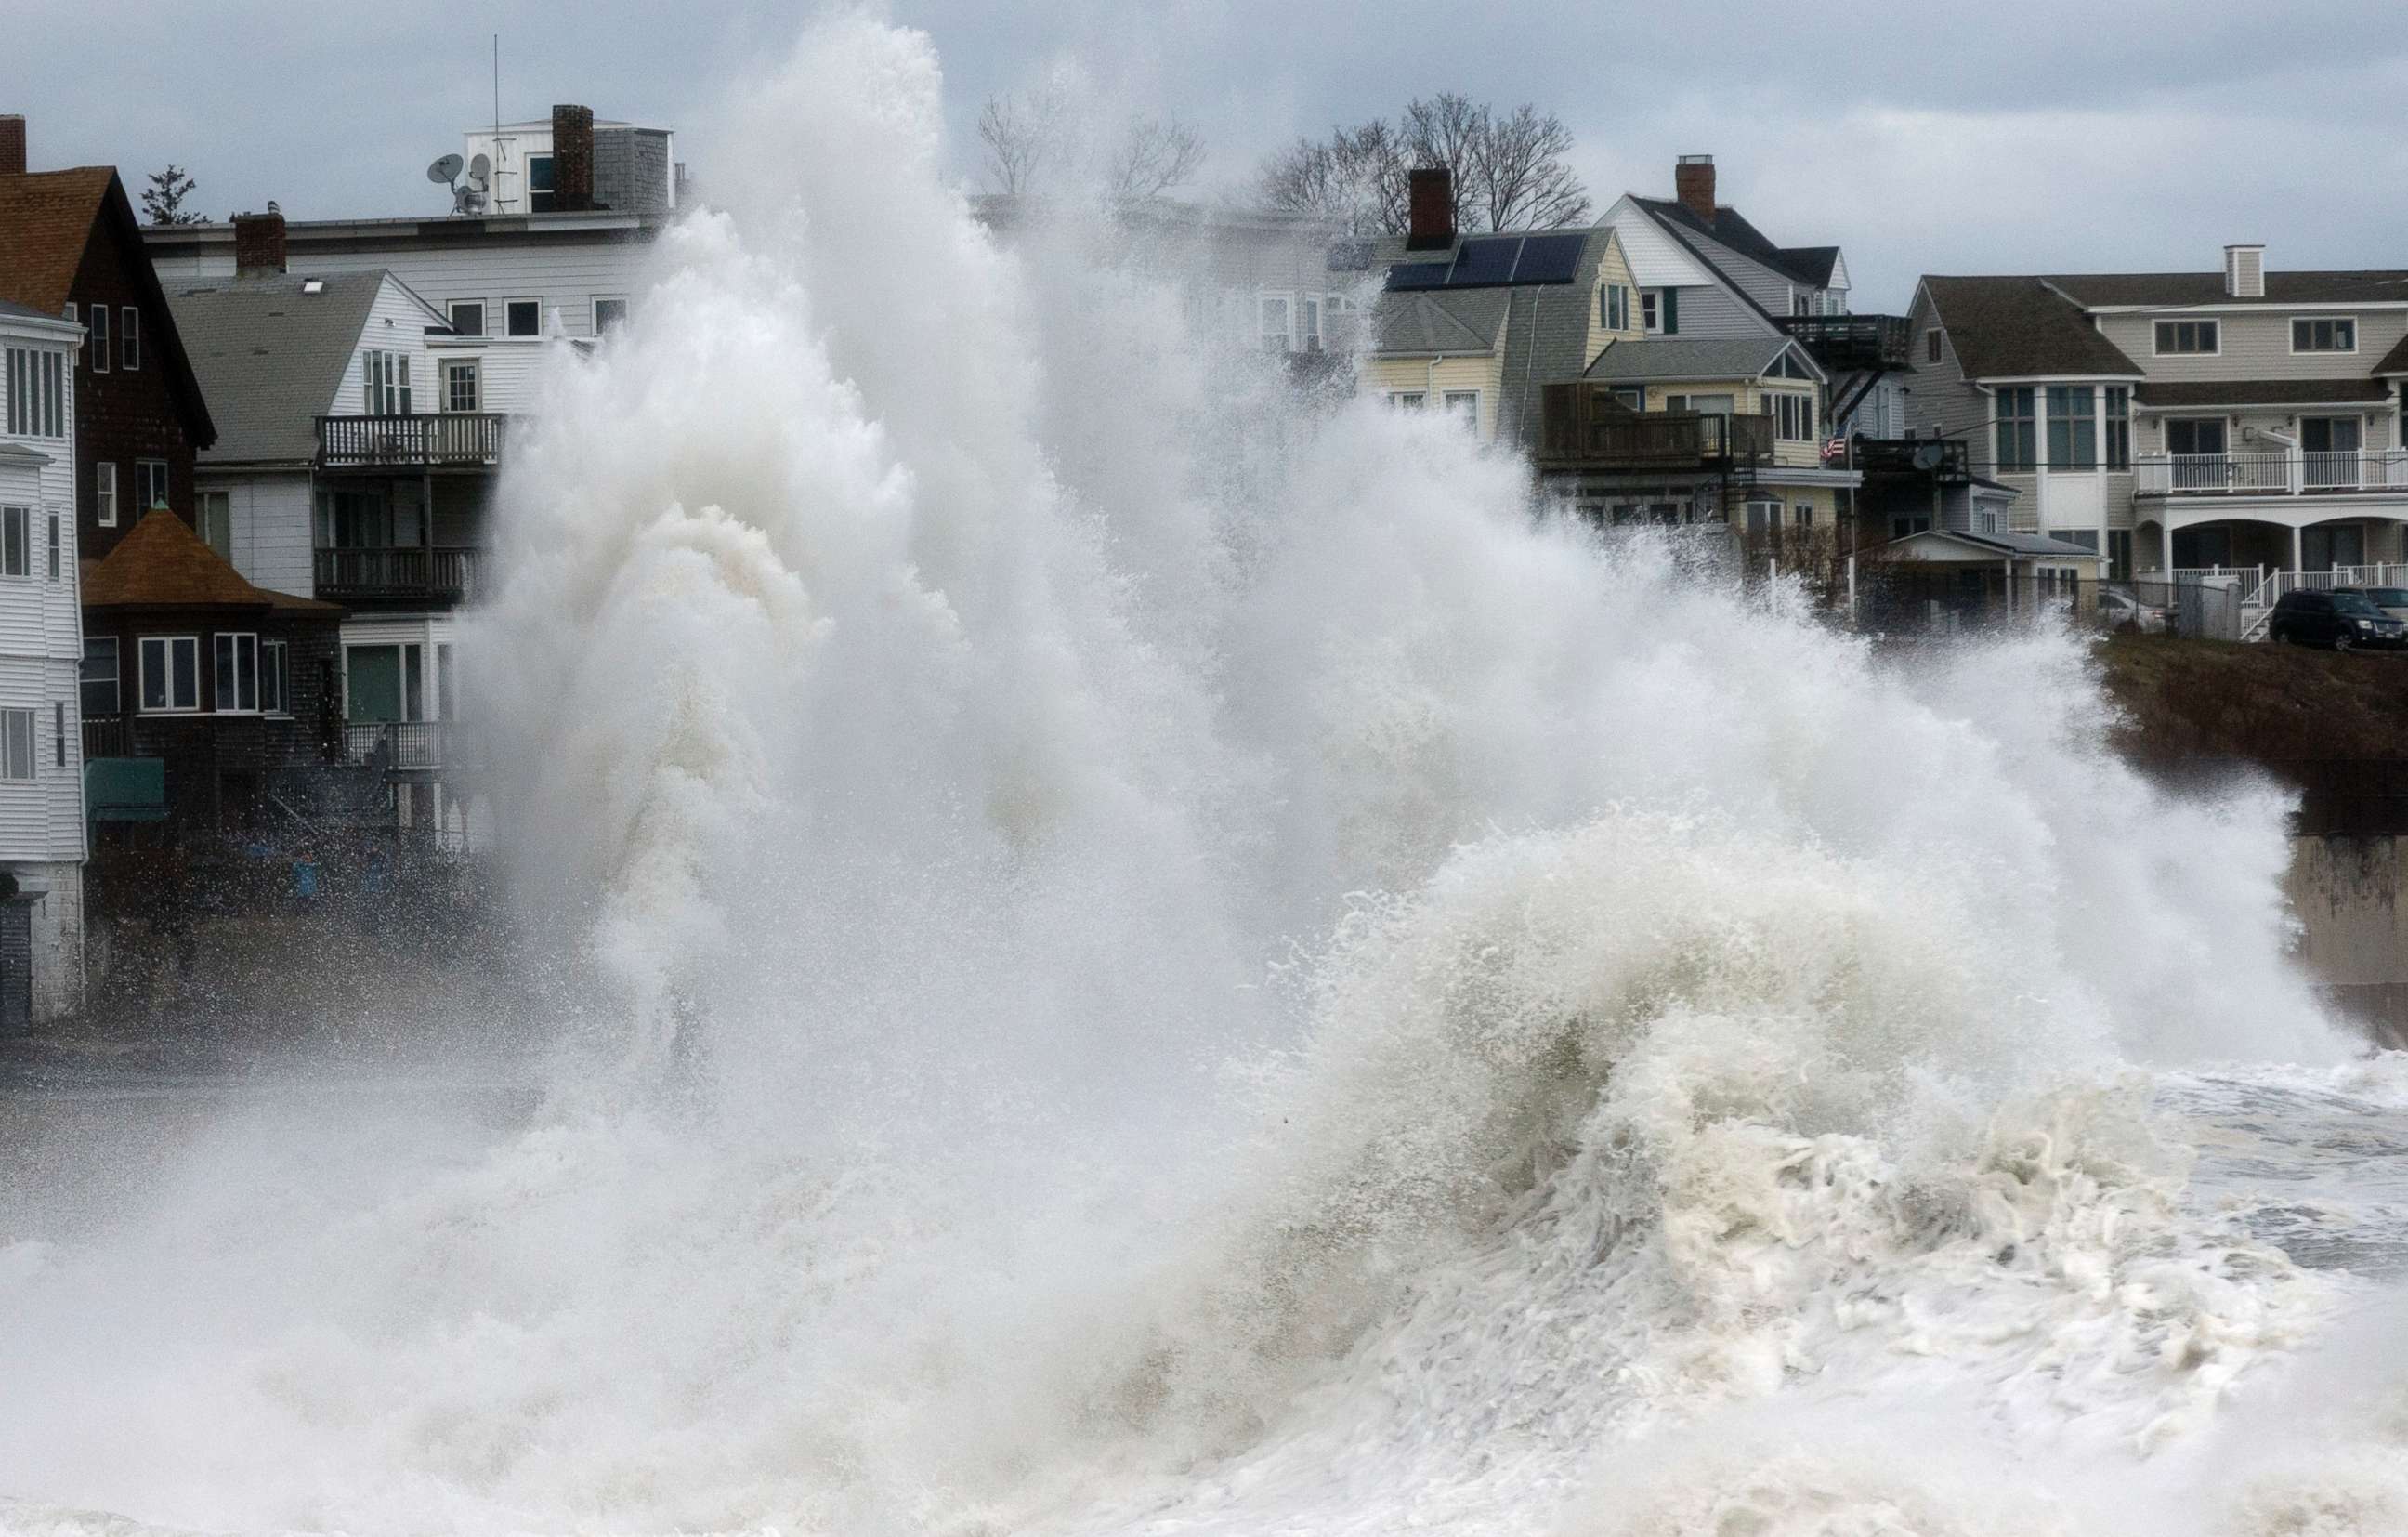 PHOTO: A large wave crashes into a seawall in Winthrop, Mass., March 3, 2018, a day after a nor'easter pounded the Atlantic coast.